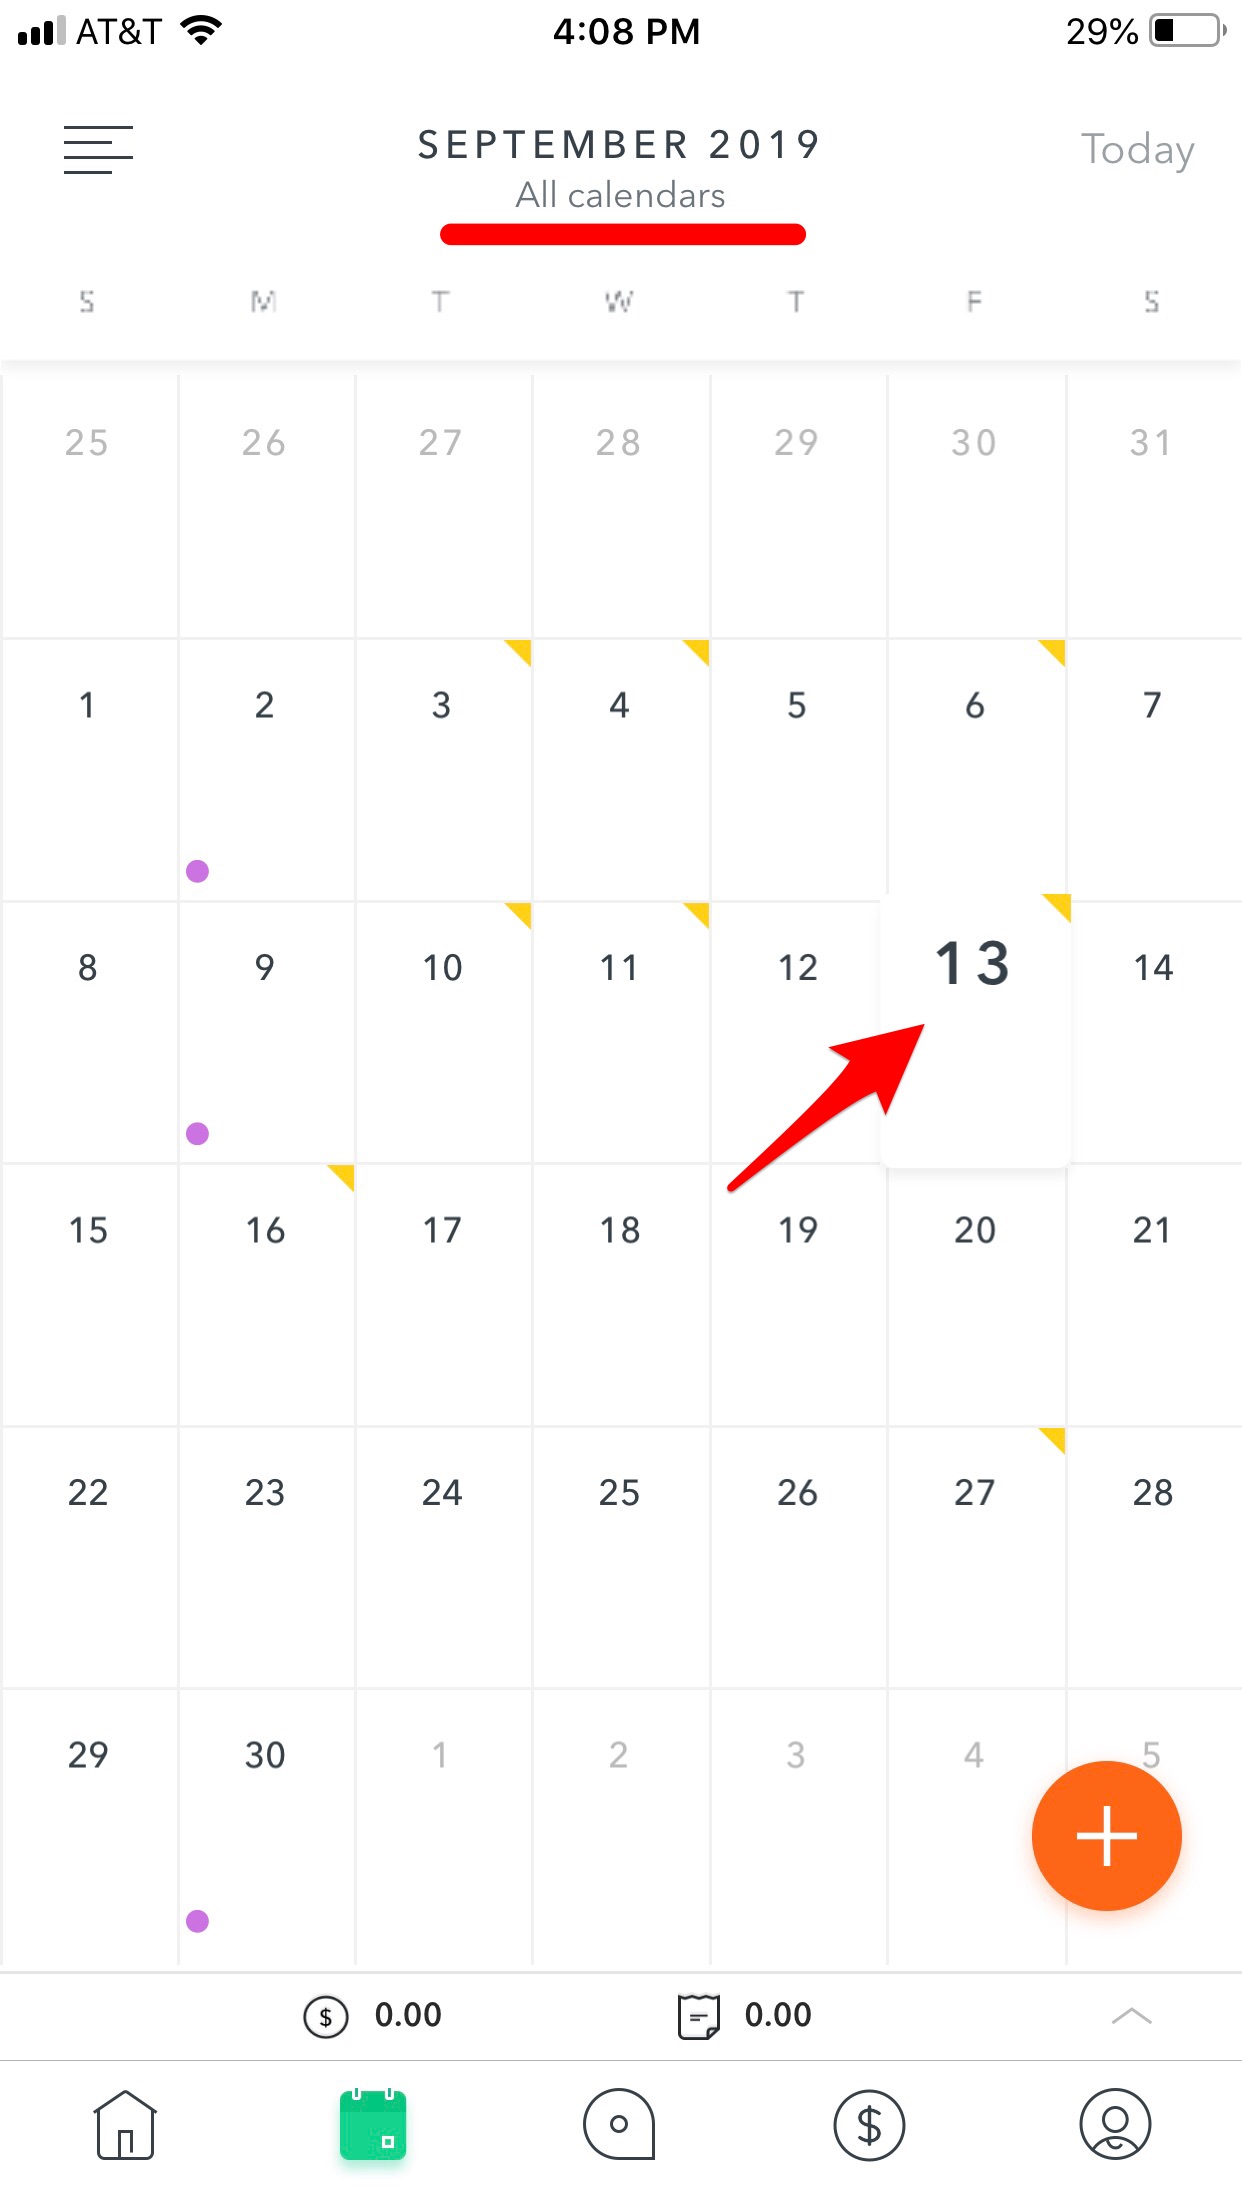 How do I edit or delete a note on my calendar? AppClose